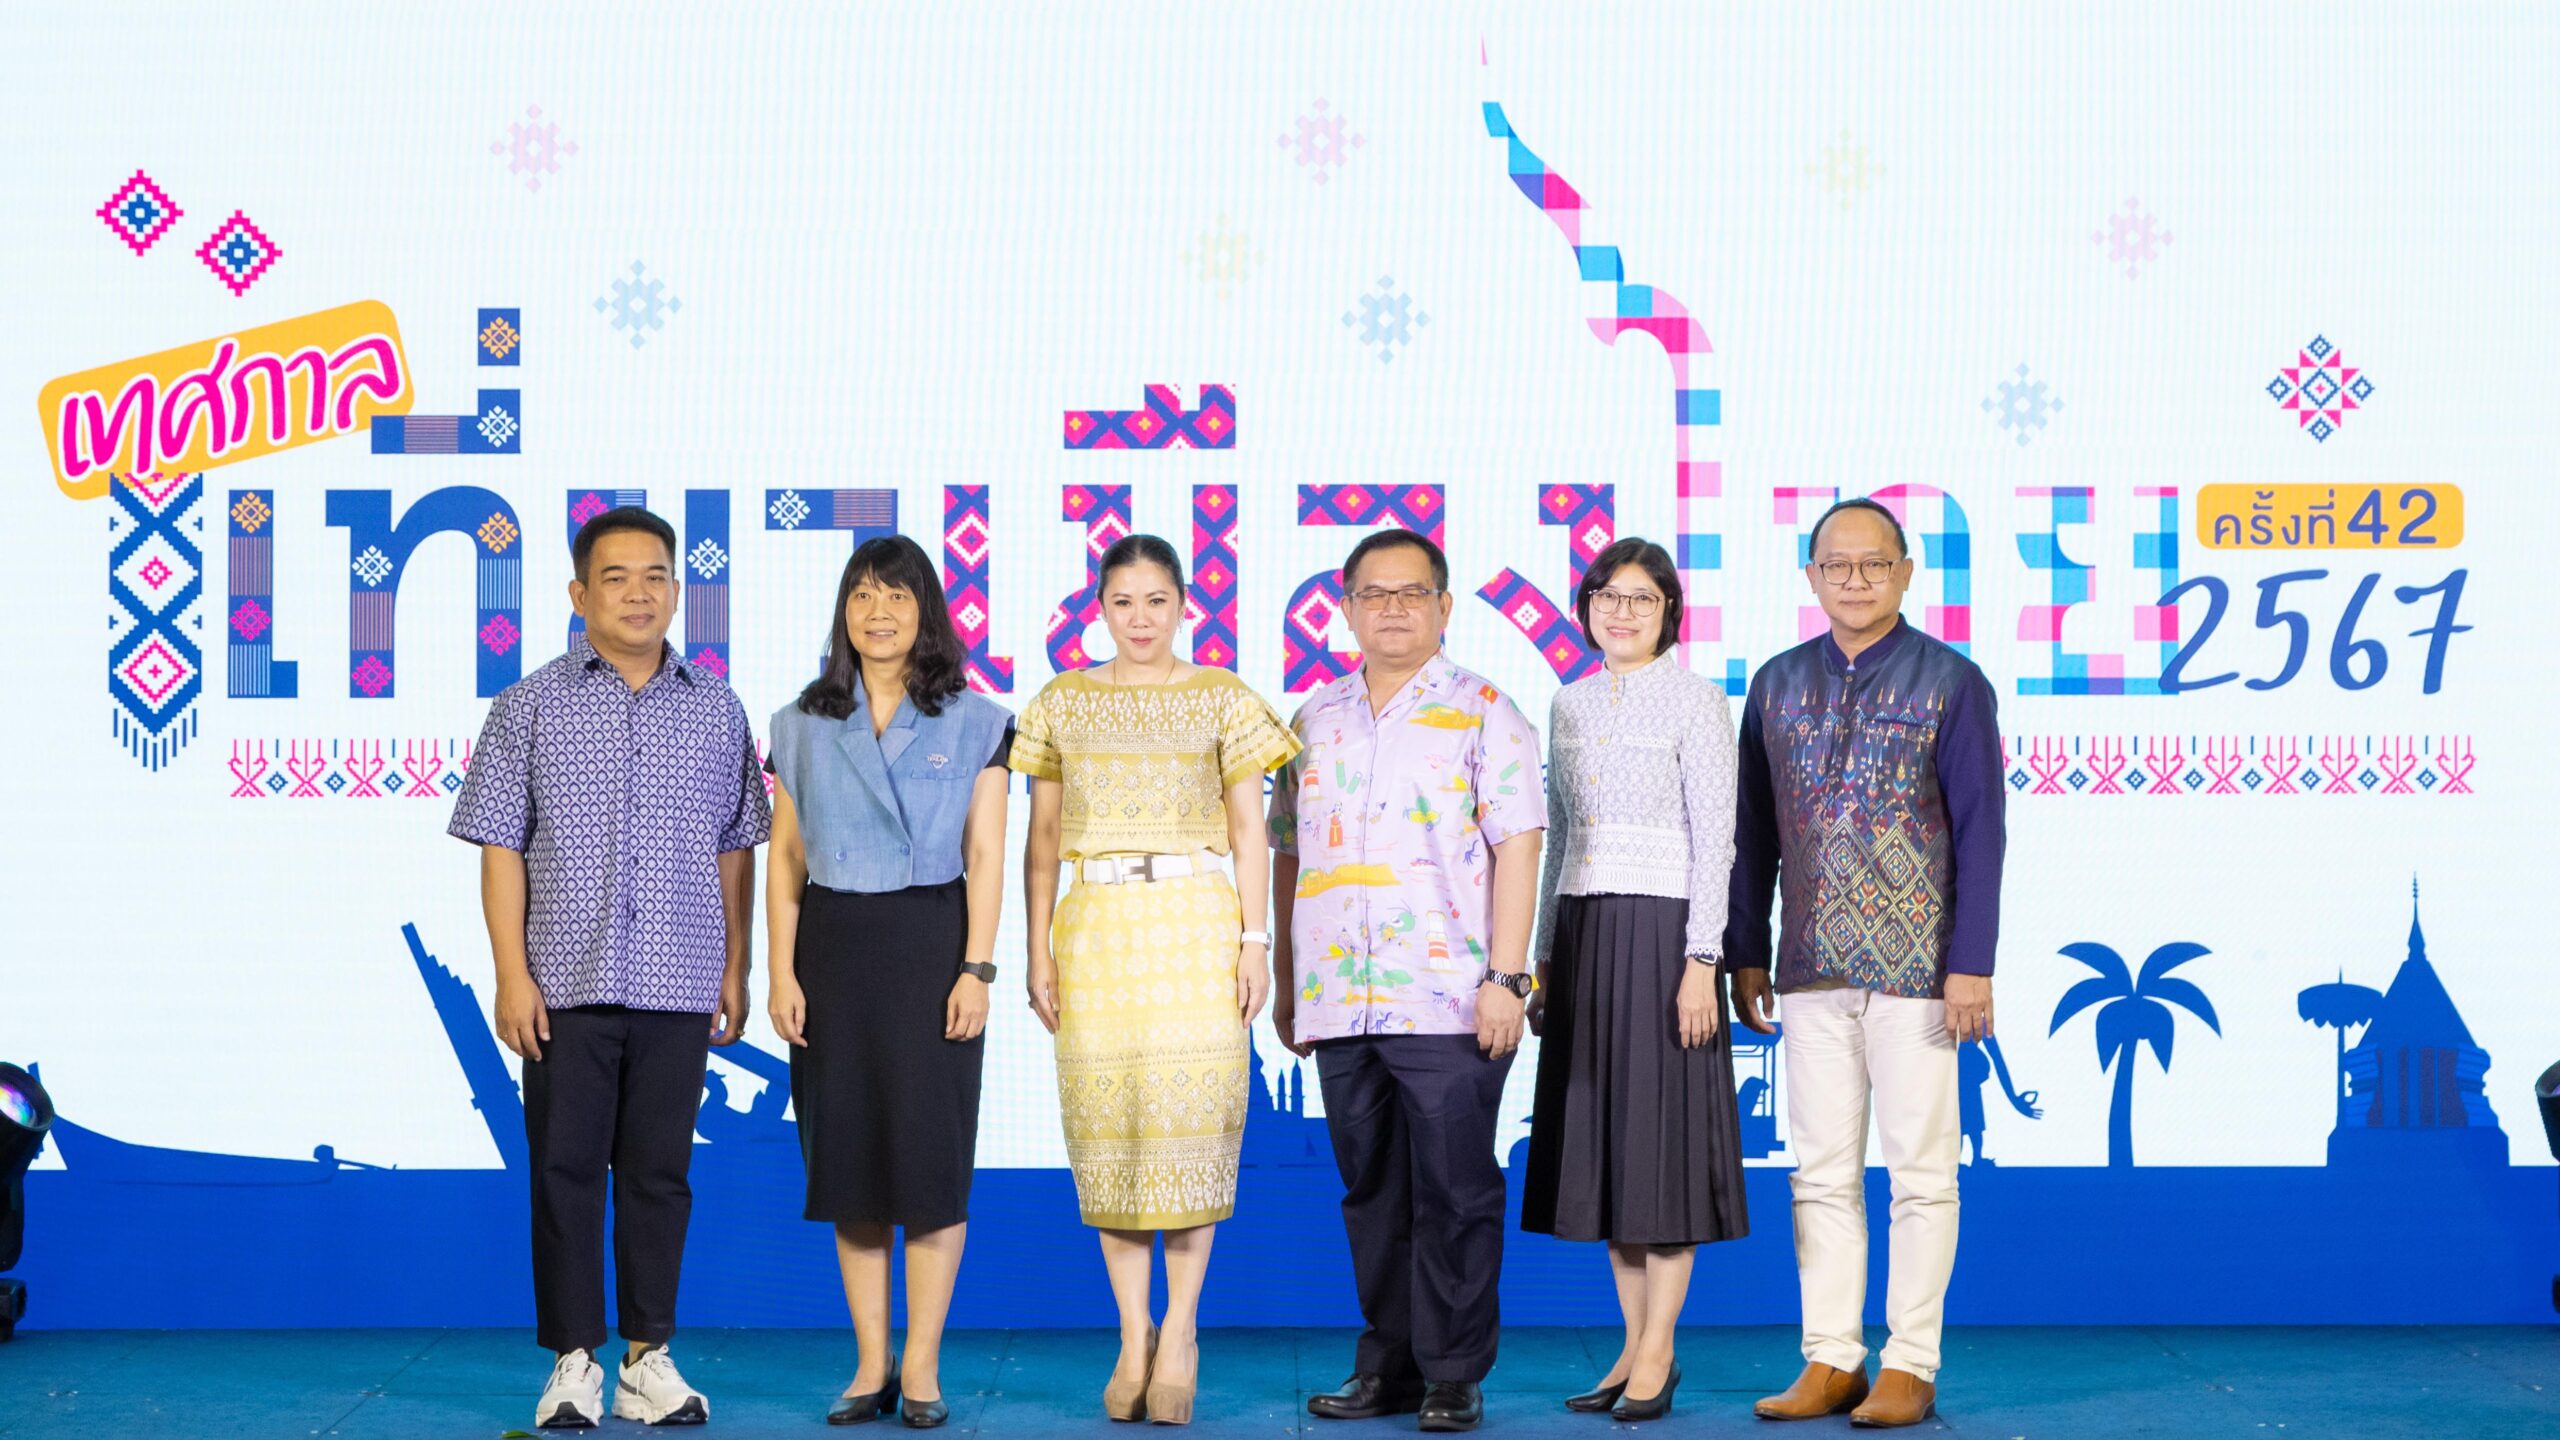 Thailand Tourism Festival 2024 takes place from 28 March to 1 April